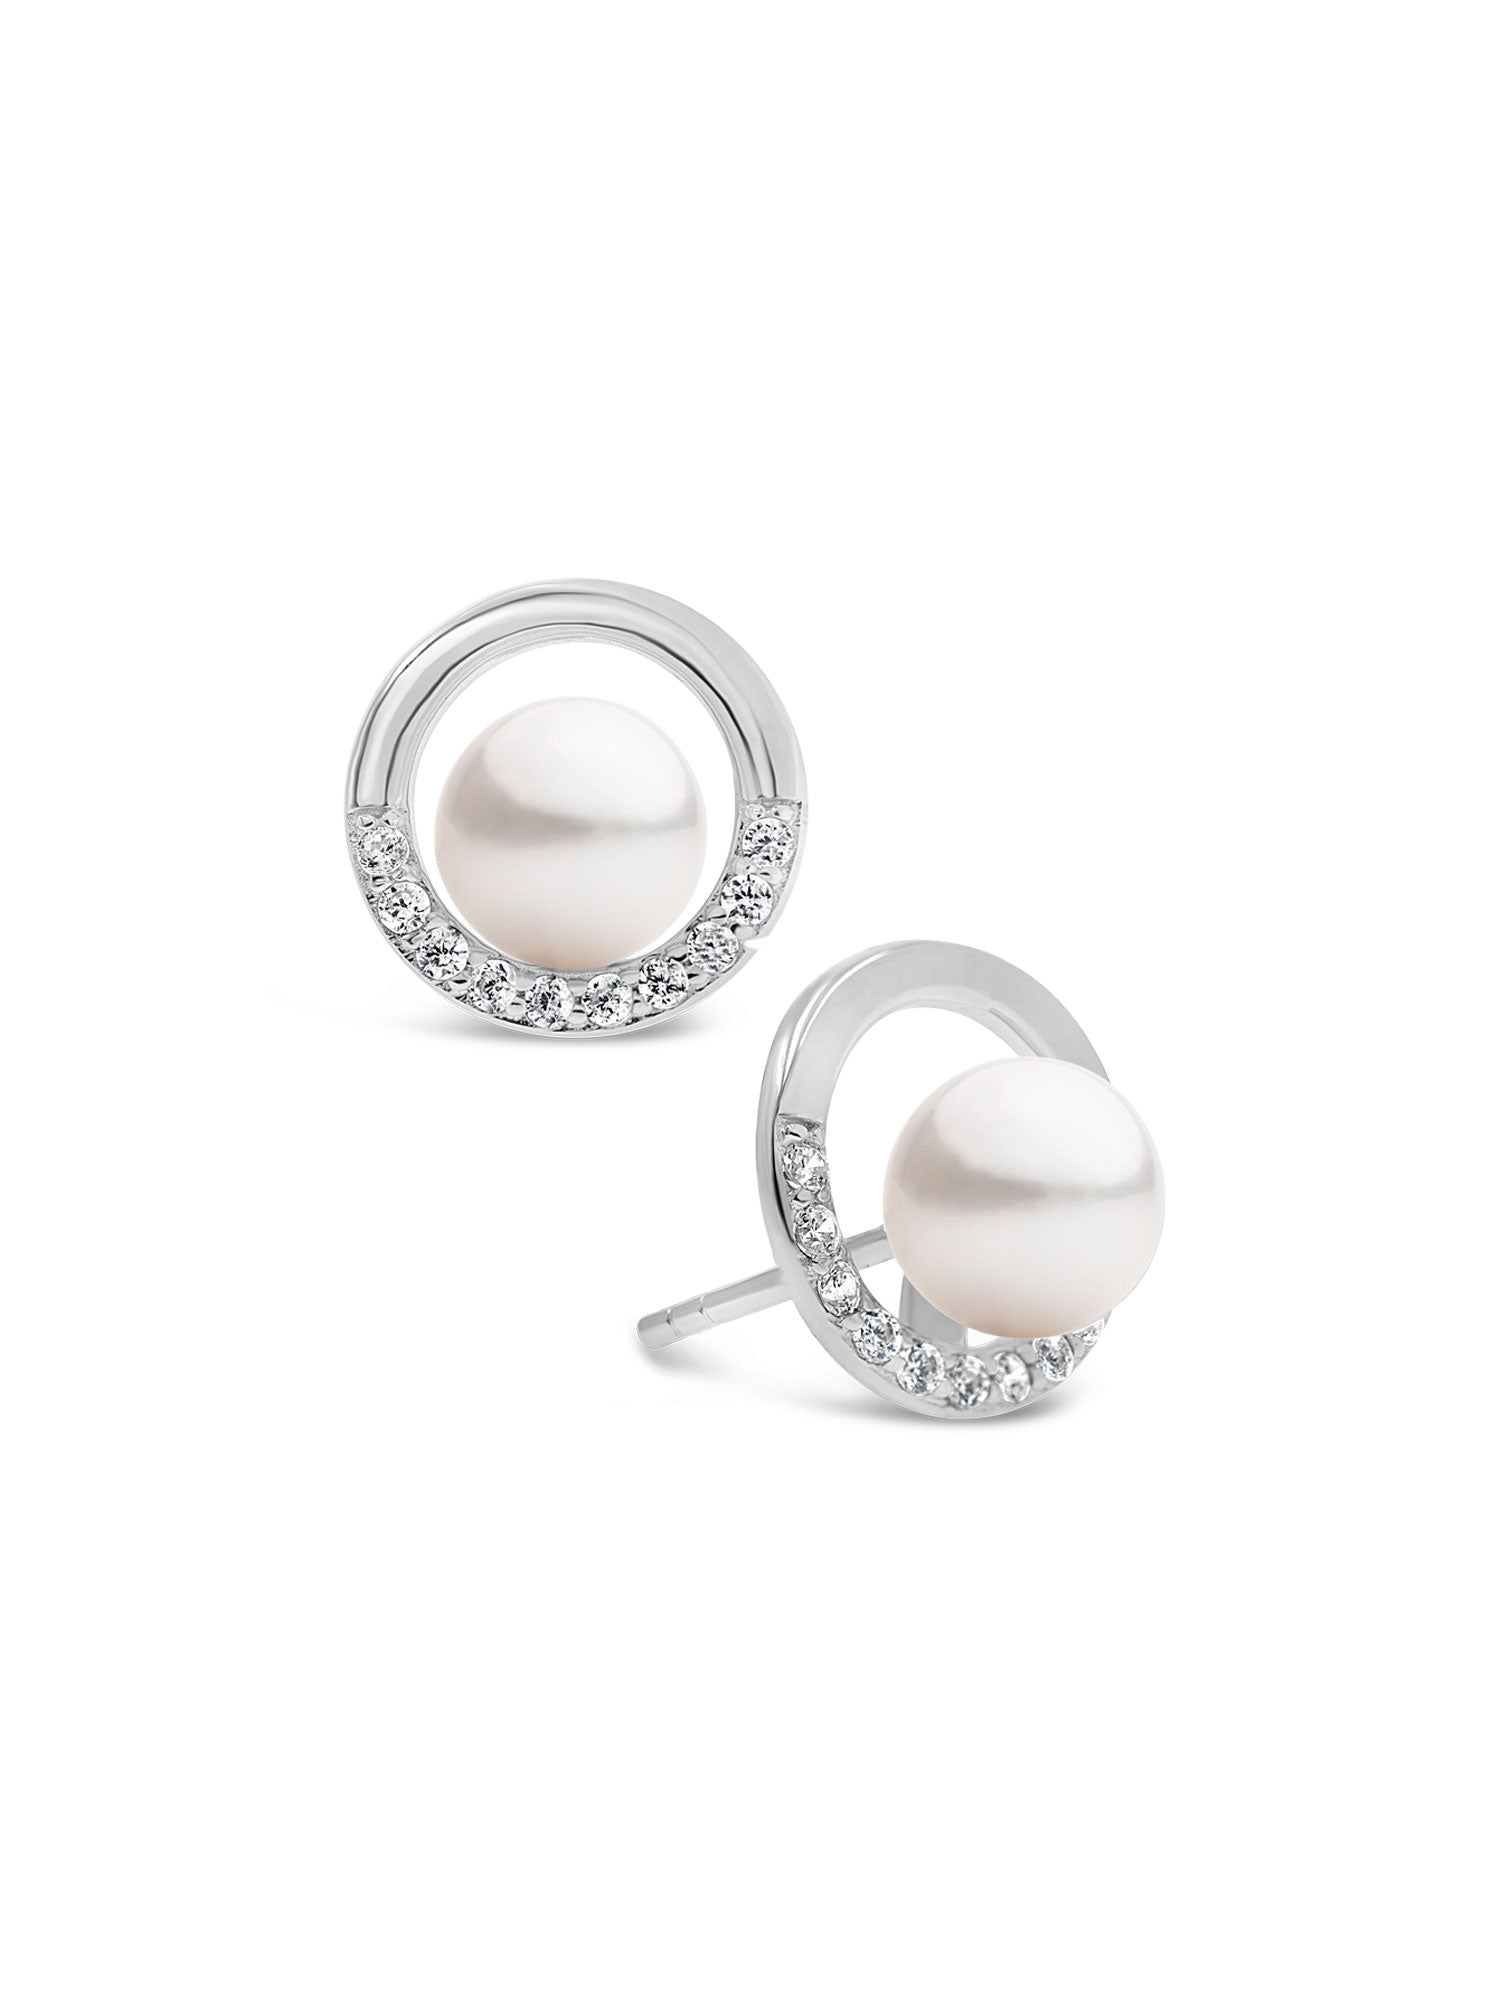 7.5-8 mm Cultured Earrings with Zirconia